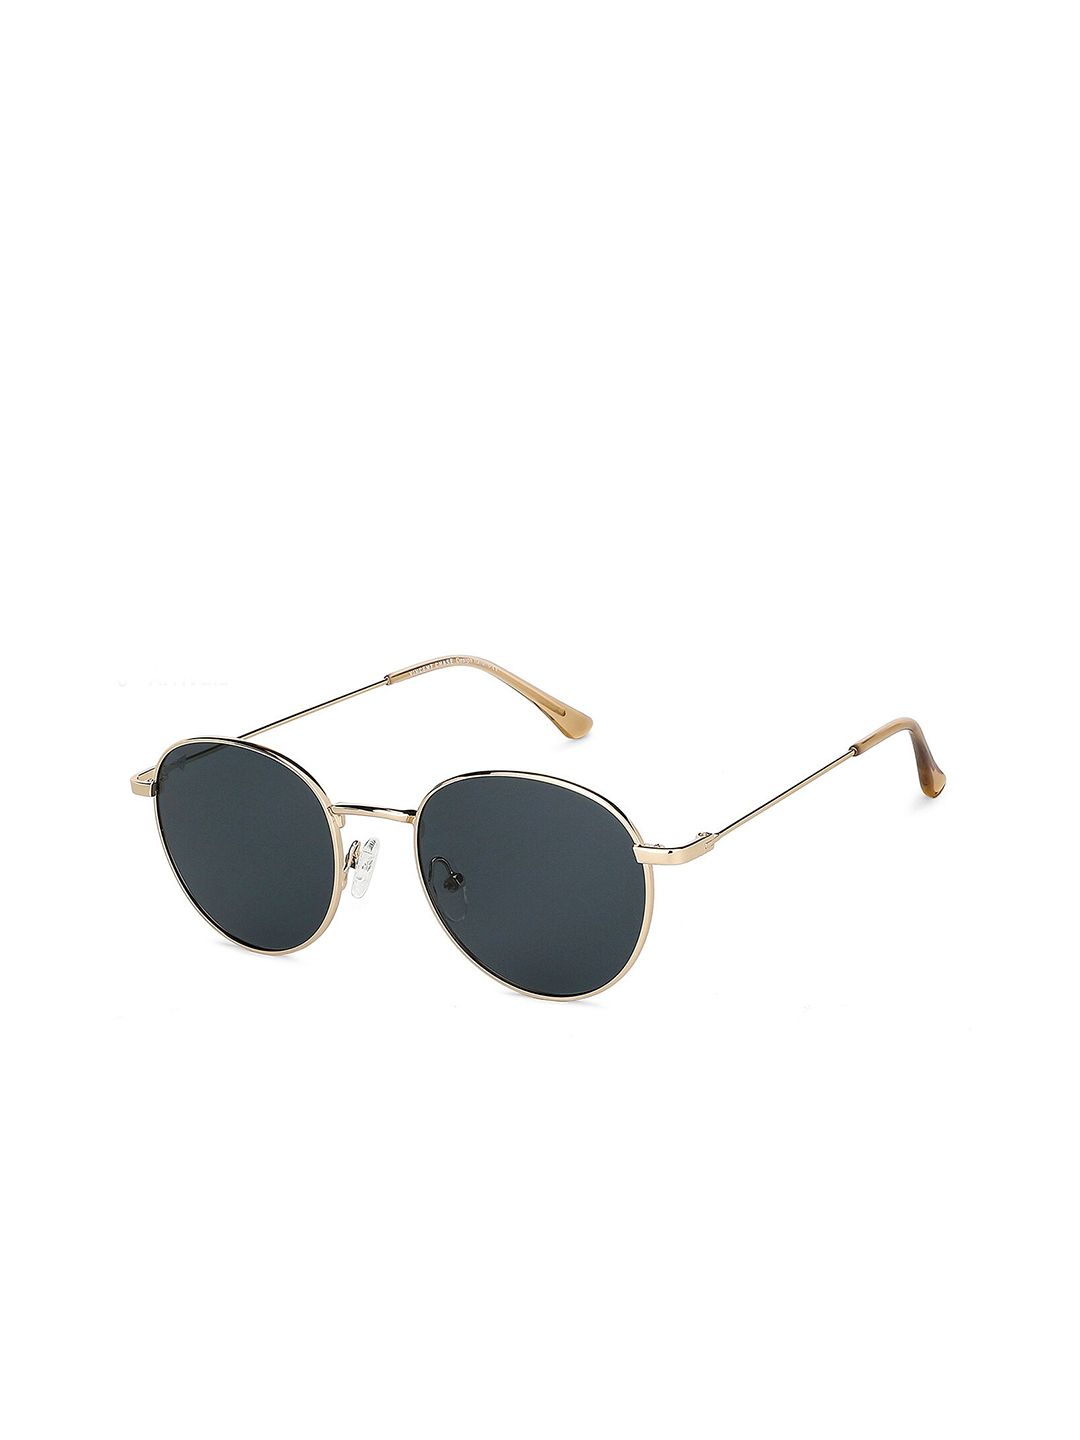 Vincent Chase Unisex Grey Lens & Gold-Toned Round Sunglasses with Polarised and UV Protected Lens